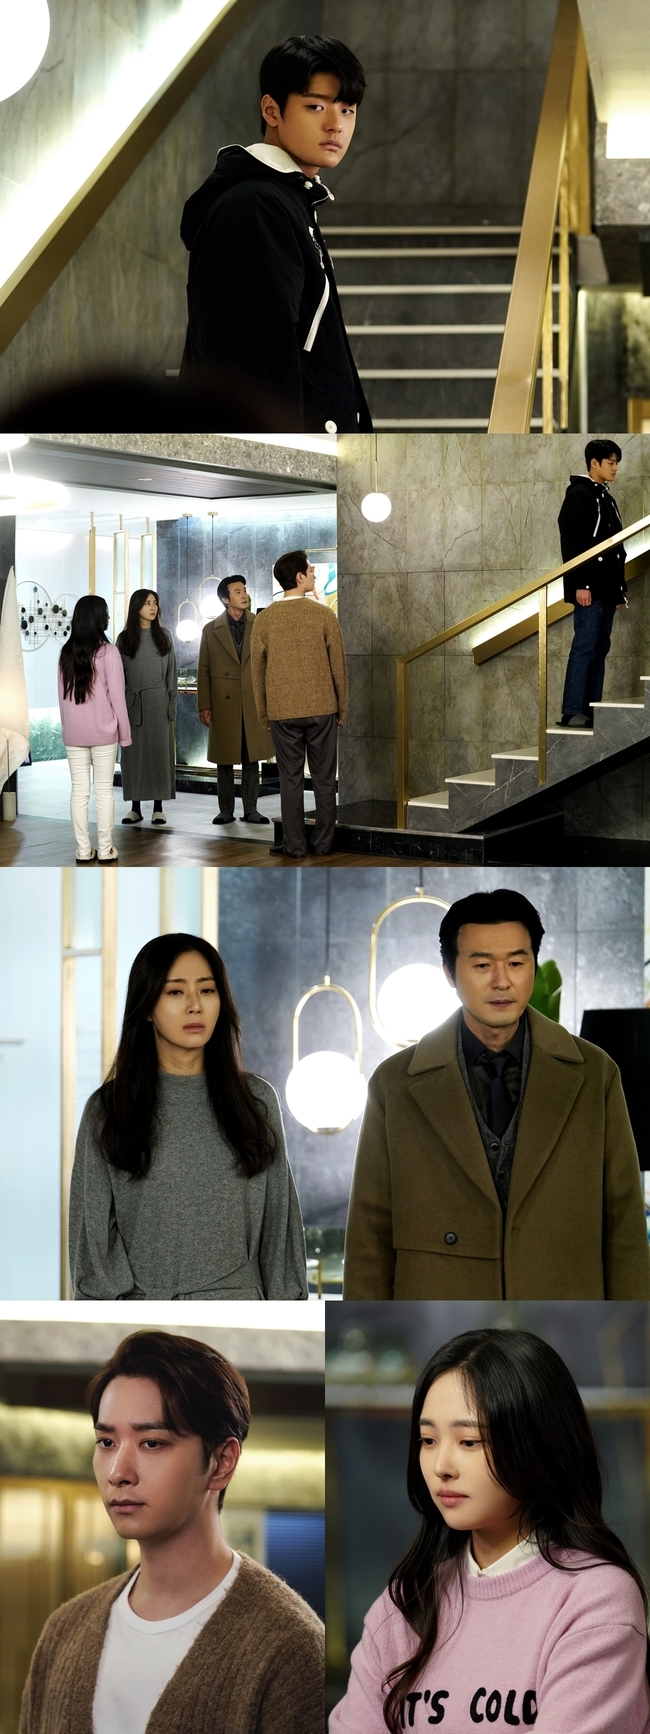 The atmosphere of the Showwindo: Queens House Song Yoon-ah - Lee Sung-jaes house became serious in Park Sang Hoons confession.On January 10th, Channel A 10th Anniversary Special YG Entertainment Wall Street drama Showwindo: The Queens House (playplayed by Han Bo-kyung, Park Hye-young / Directed by Kangsol, Park Dae-hee / Produced by Kotop Media / YG Entertainment Channel A) was broadcast on 13th, which was the son of Han Sun-joo (Song Yoon-ah) - Shin Myung-seop (Lee Sung-jae) Park Sang Hoon was shocked by the fact that he was the culprit who stabbed Yoon Mi-ra (Jeon So-min).Above all, the appearance of Han Seon-ju, who listened to this and was angry, made the hearts of viewers sick.Meanwhile, on January 11, Showwindo: The Queens House released a still cut showing Tae-yong and his family returning home after the investigation ahead of the 14th broadcast.A gloomy atmosphere that can not be explained in words is being conveyed to the outside of the picture.The first look of the eye is the noticeably darkened look of Tae-yong, which is always bright and energetic, and this change comes even bigger.I feel a complicated feeling from Tae Yong who goes up to the room alone to avoid the family gathered in the living room.The people left in the living room are also looking serious. Han Sun-joo, Shin Myung-seop, Uncle Han Jeong-won (Hwang Chan-sung), and sister Tae-hee (Shin Lee-jun).The youngest confession of Tae-yong seems to have lost everyones words. I wonder how the shock of the day will affect these families in the future.